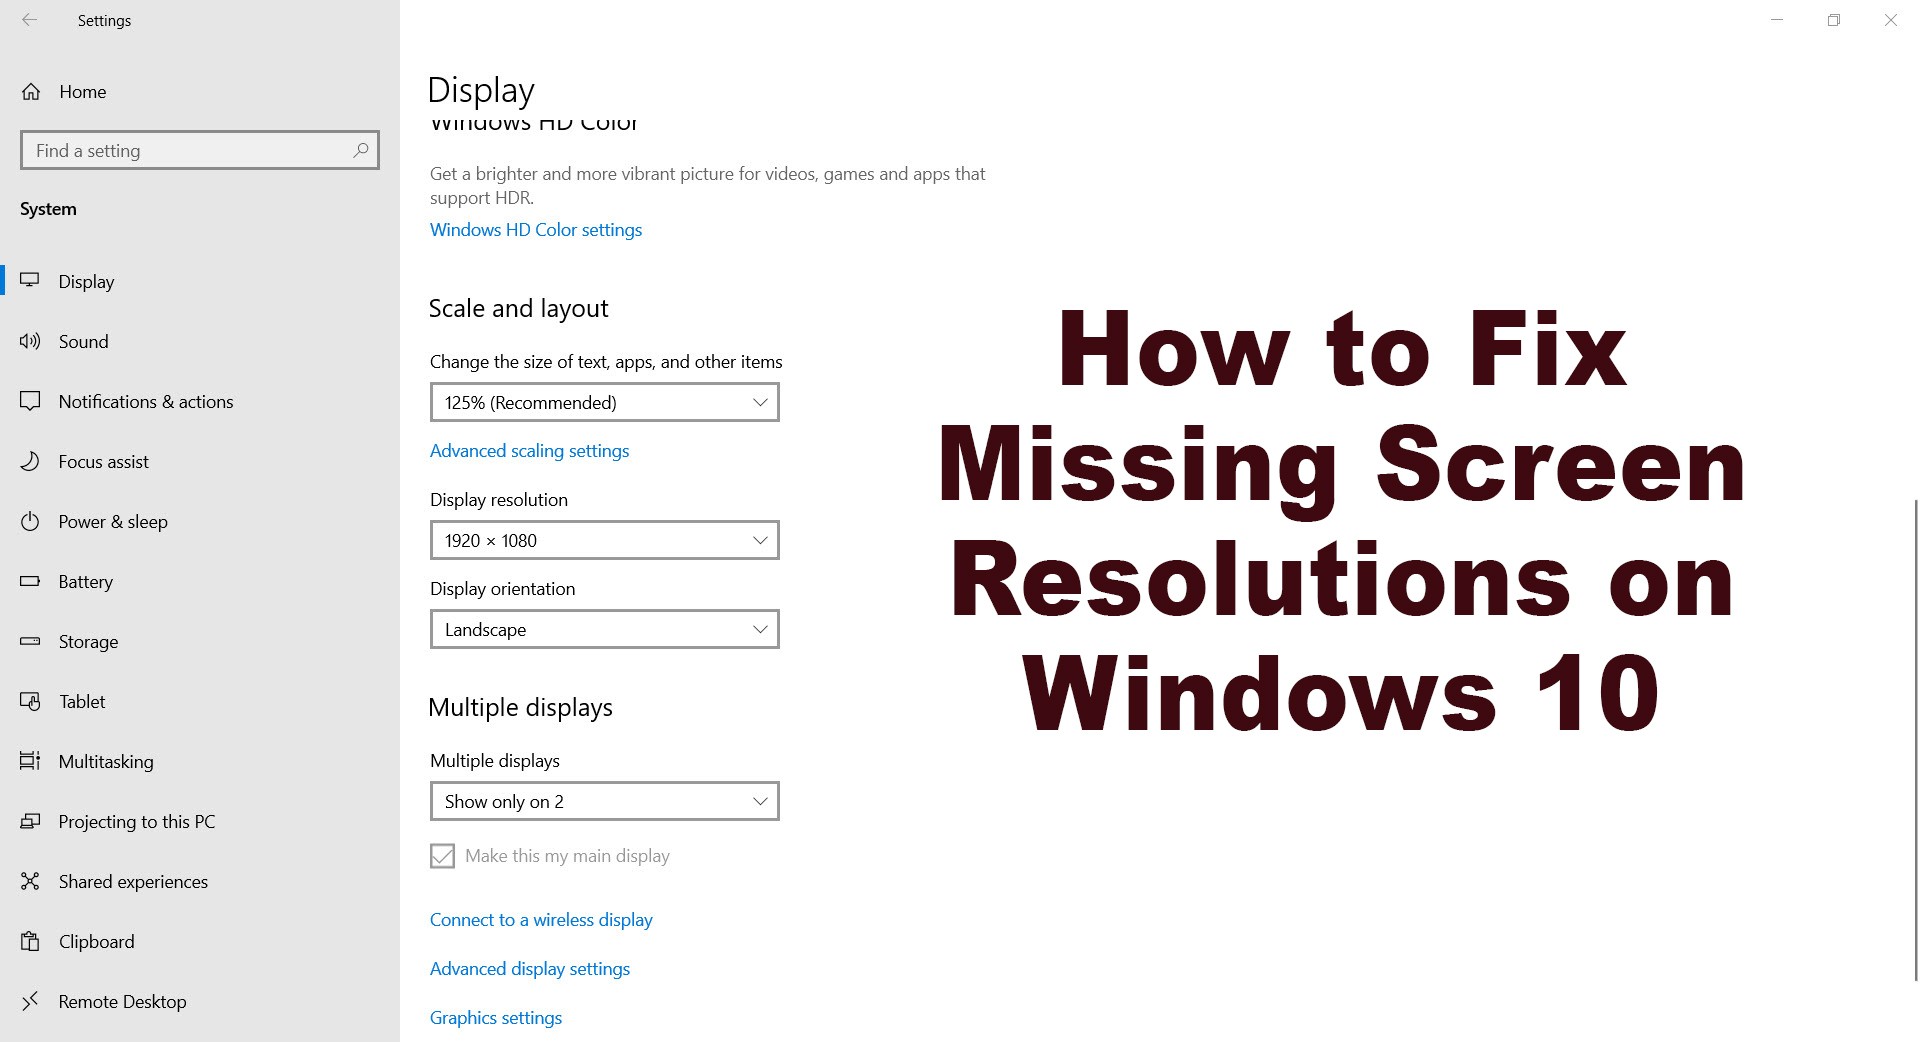 How to Fix Missing Screen Resolution on Windows 10